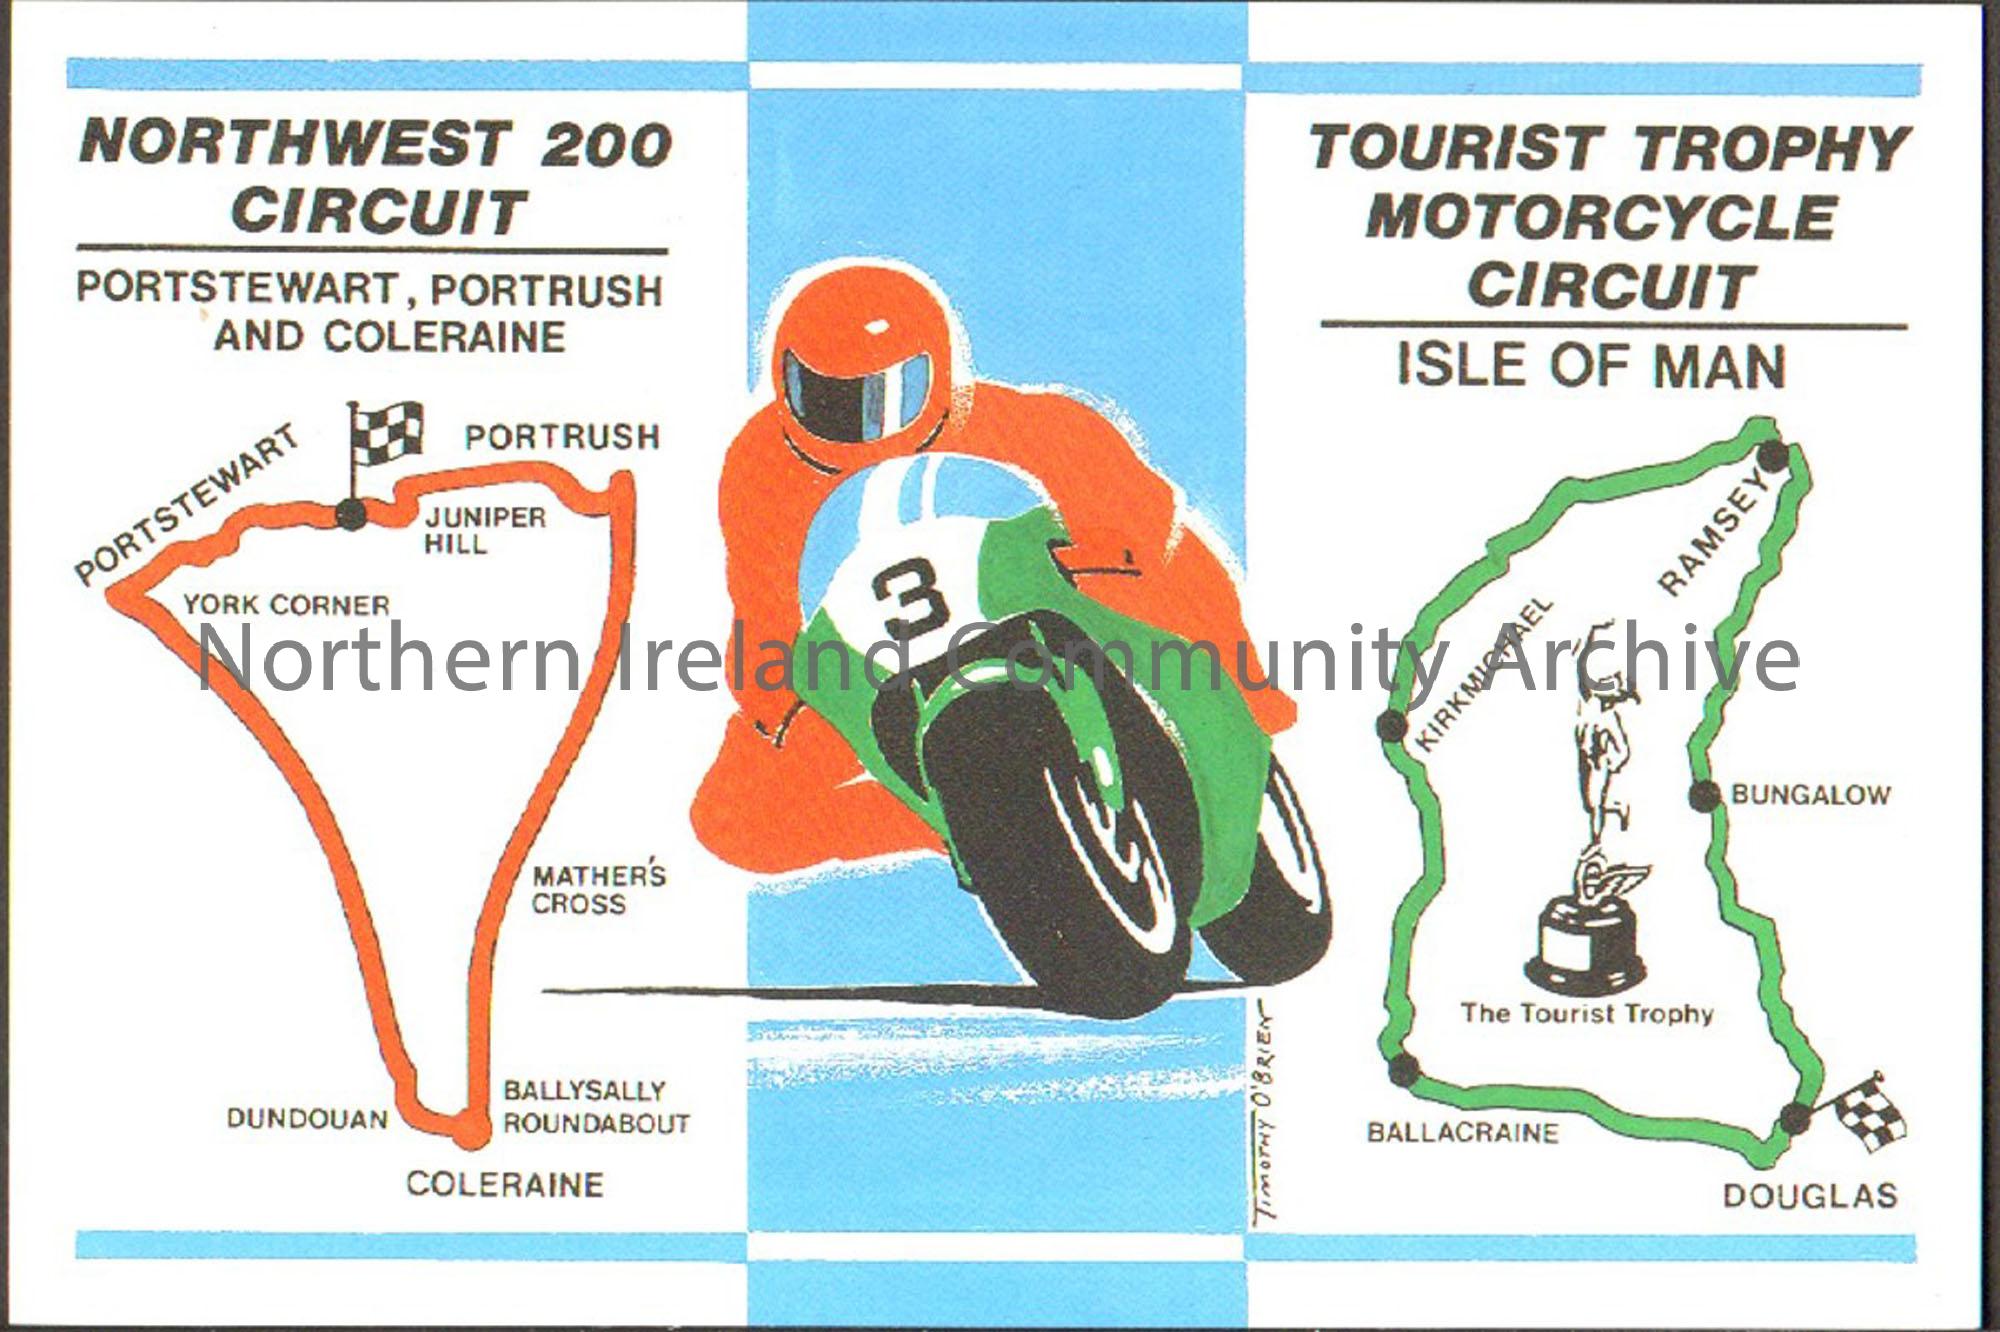 North West 200 Circuit and Tourist Trophy Motorcycle Circuit postcard. Two maps of the circuits either side of an image of a man wearing red riding a …